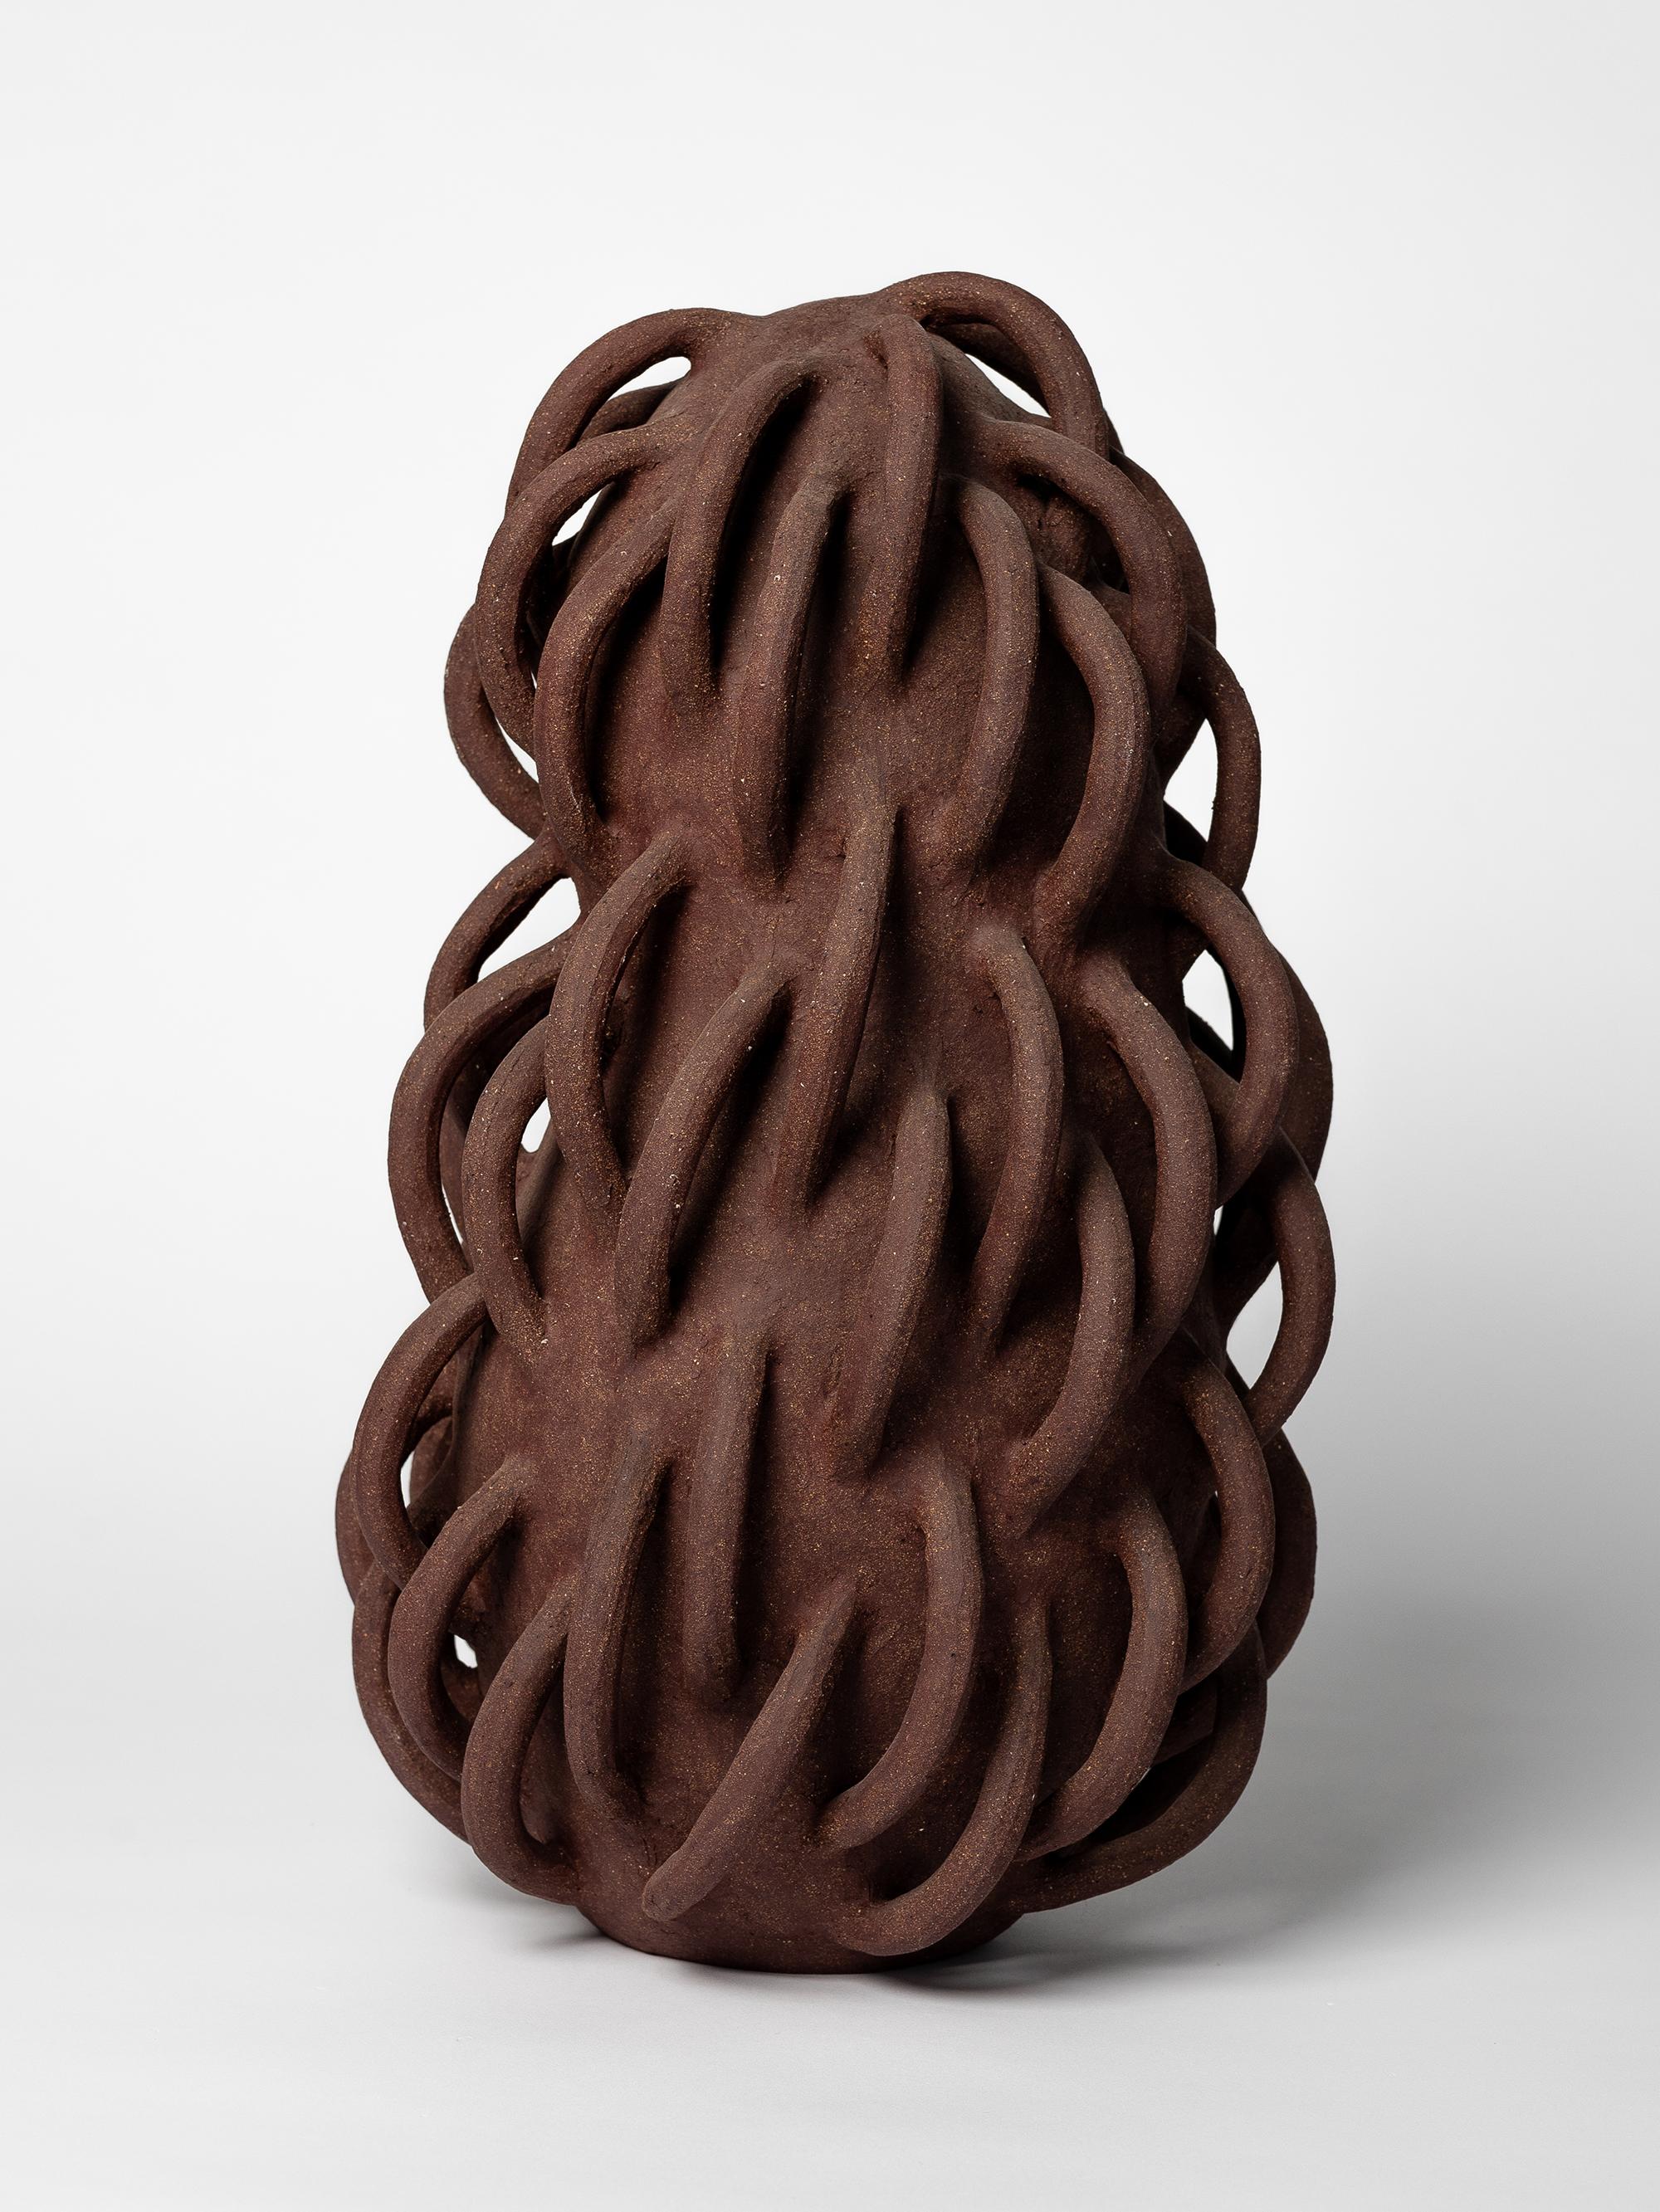 French Contemporary Handcrafted brown ceramicFoisonnement n°2 by Julie Bergeron For Sale